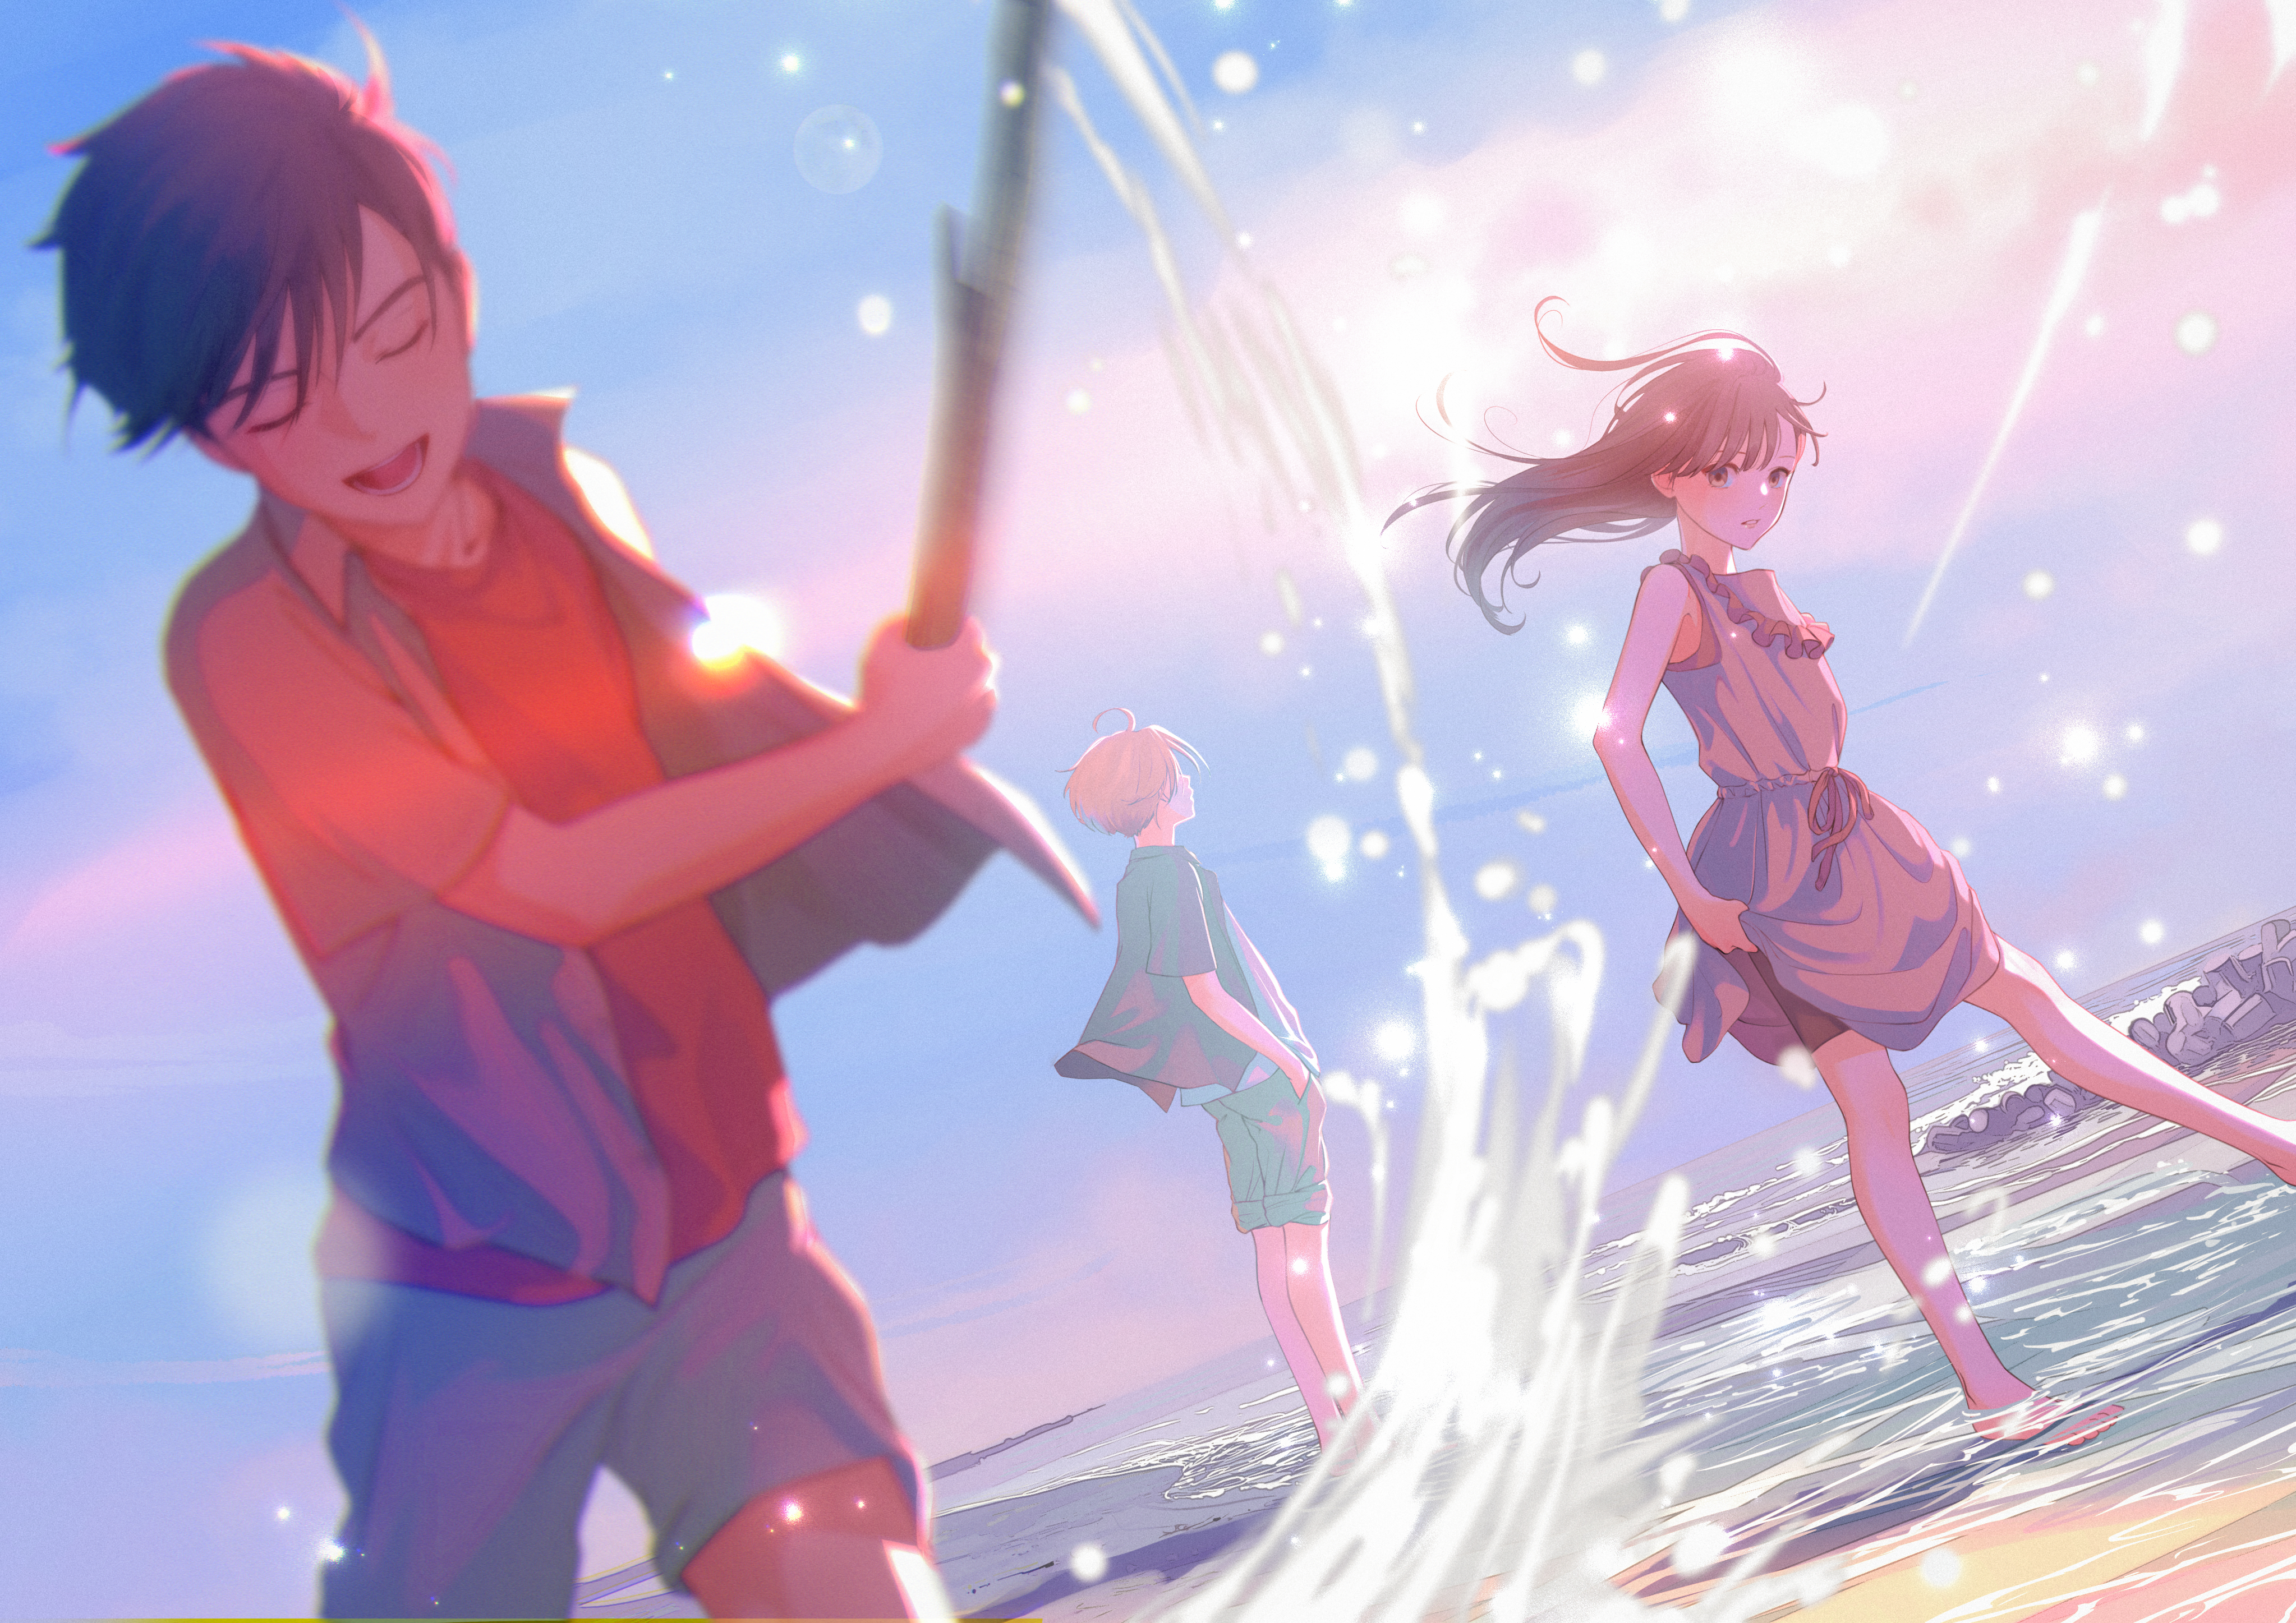 Playing on the beach by まかろんＫ